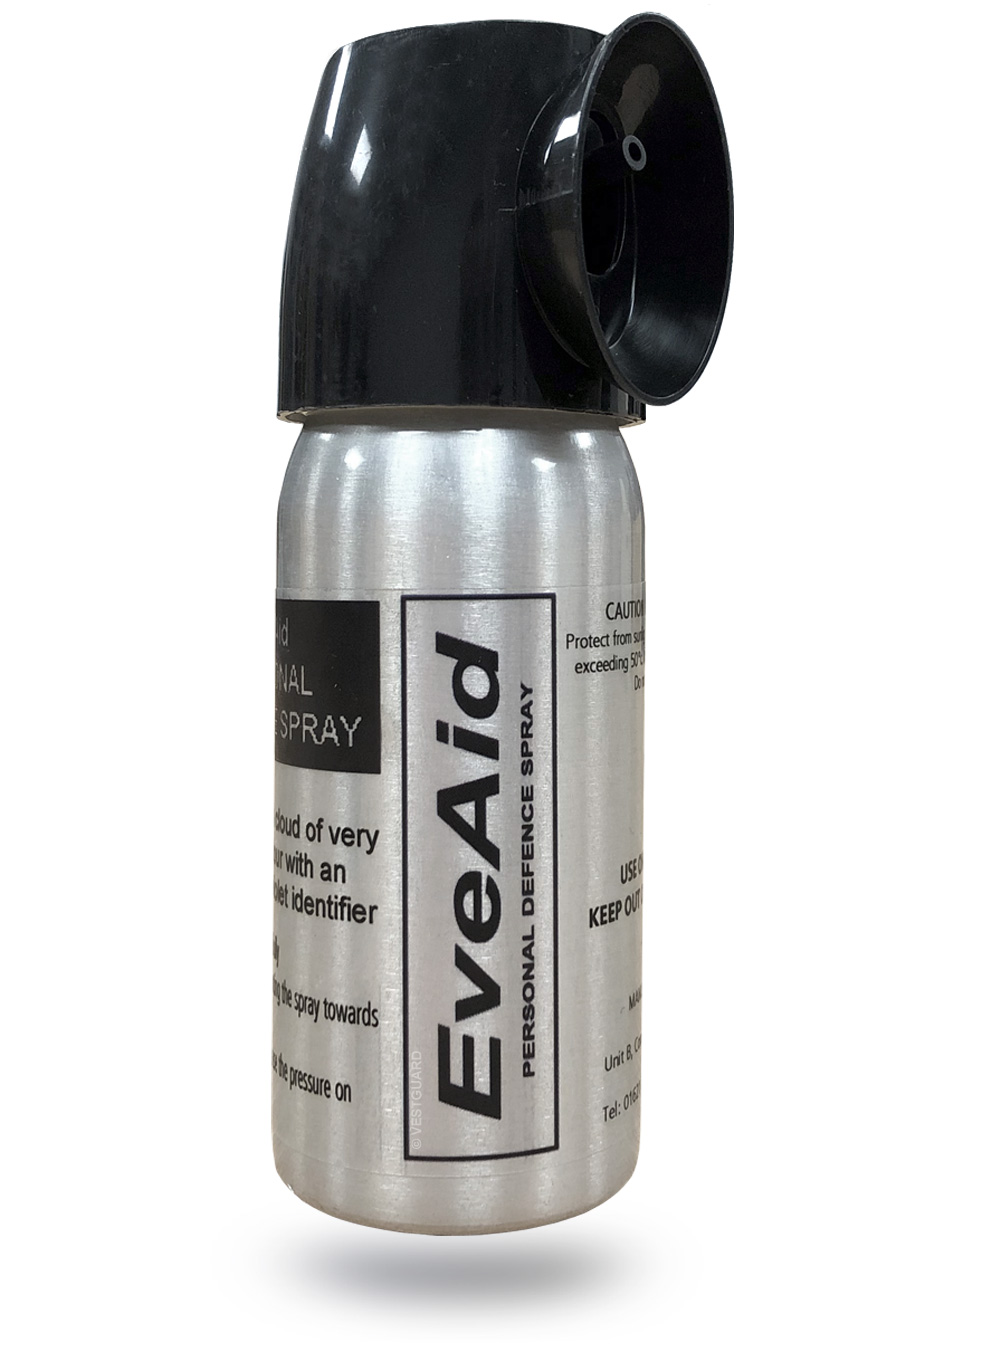 VestGuard EveAid Personal Defence Spray for Protection from